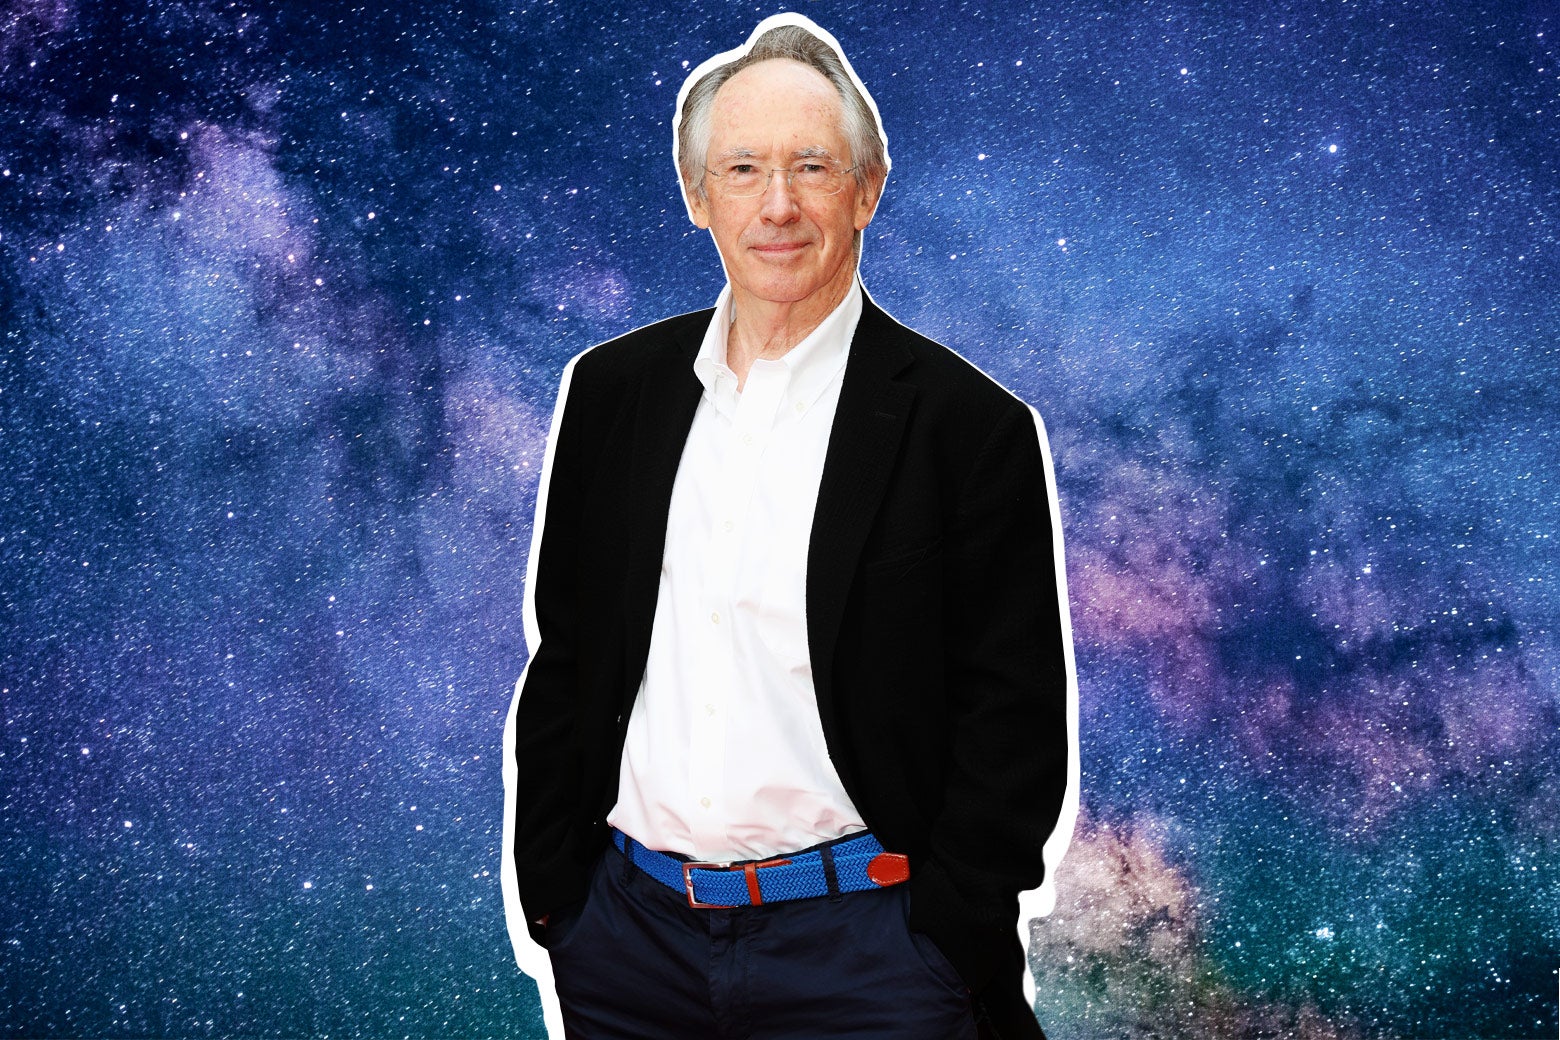 Ian McEwan in front of a starry view of space.